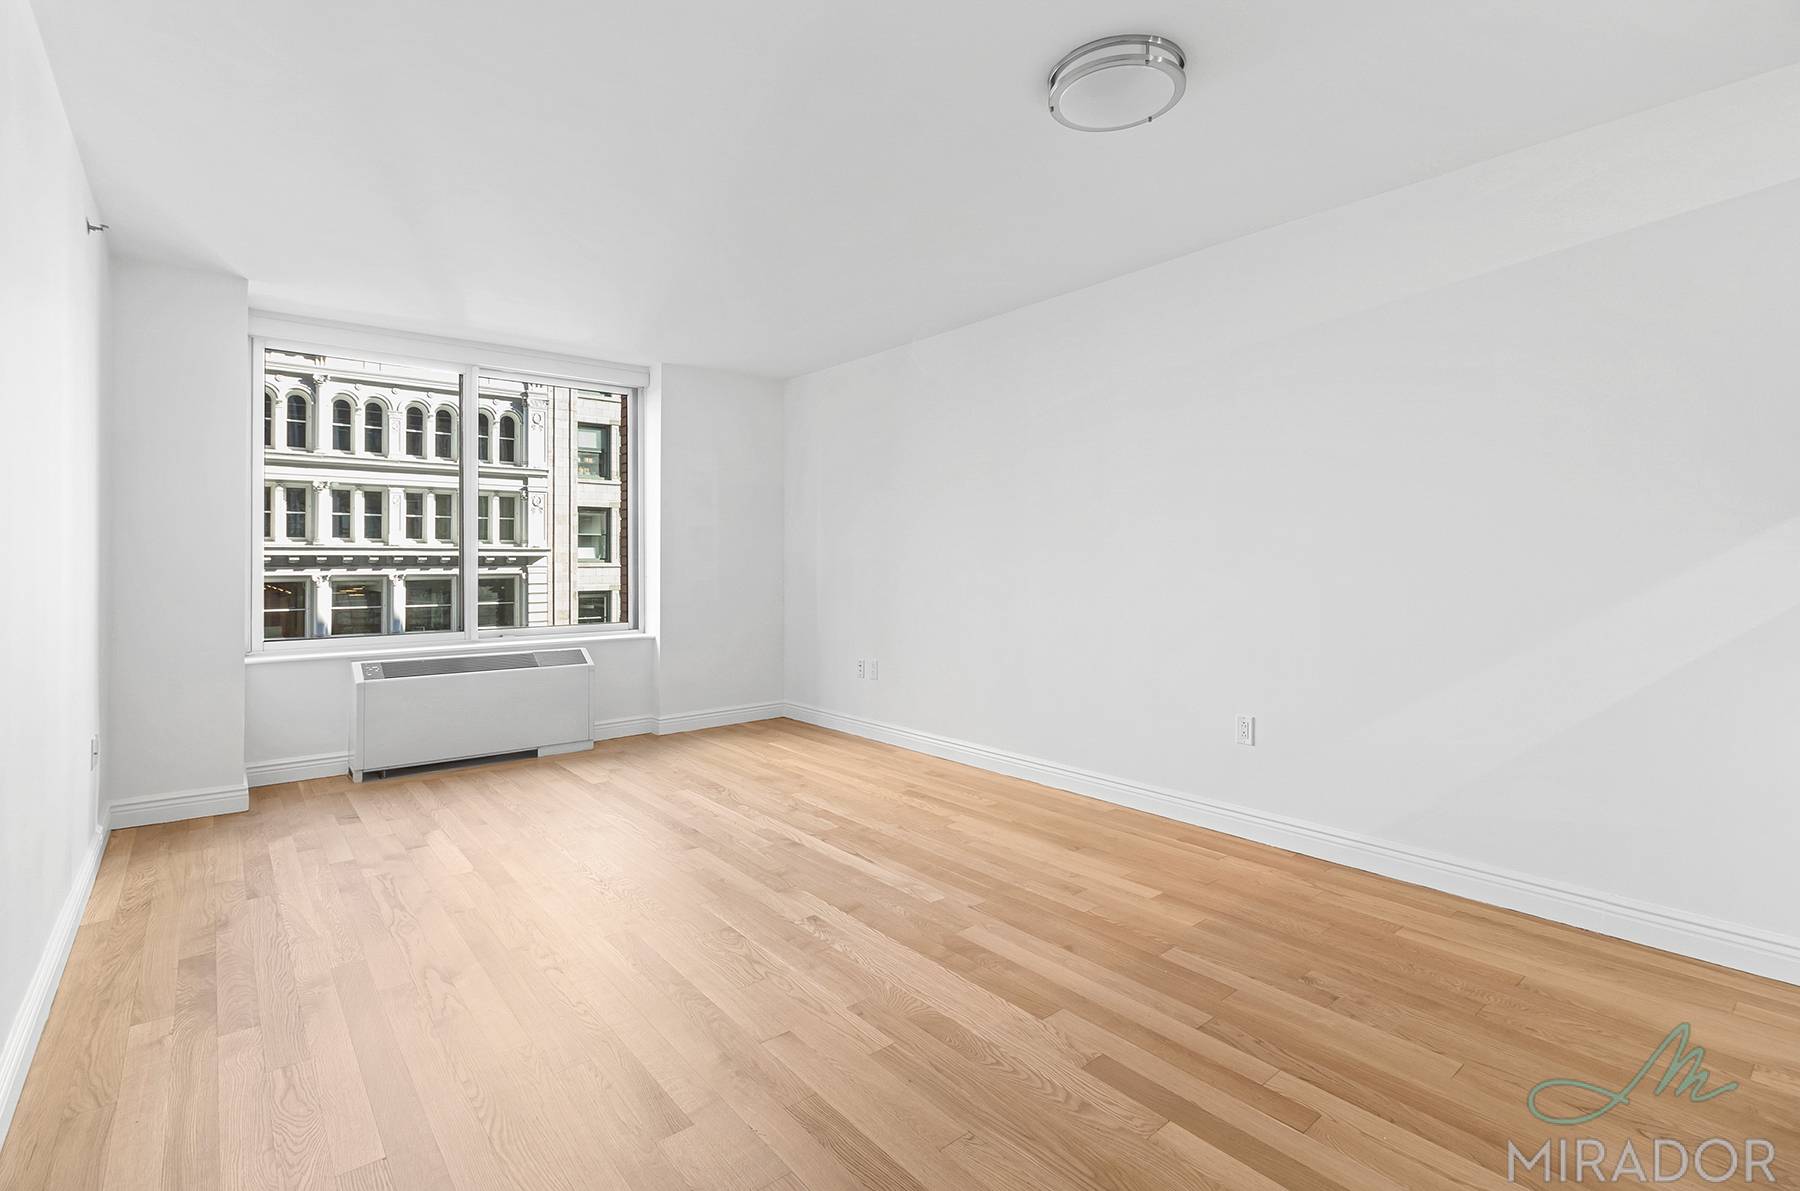 Beautifully renovated one bedroom apartment at The Caroline.